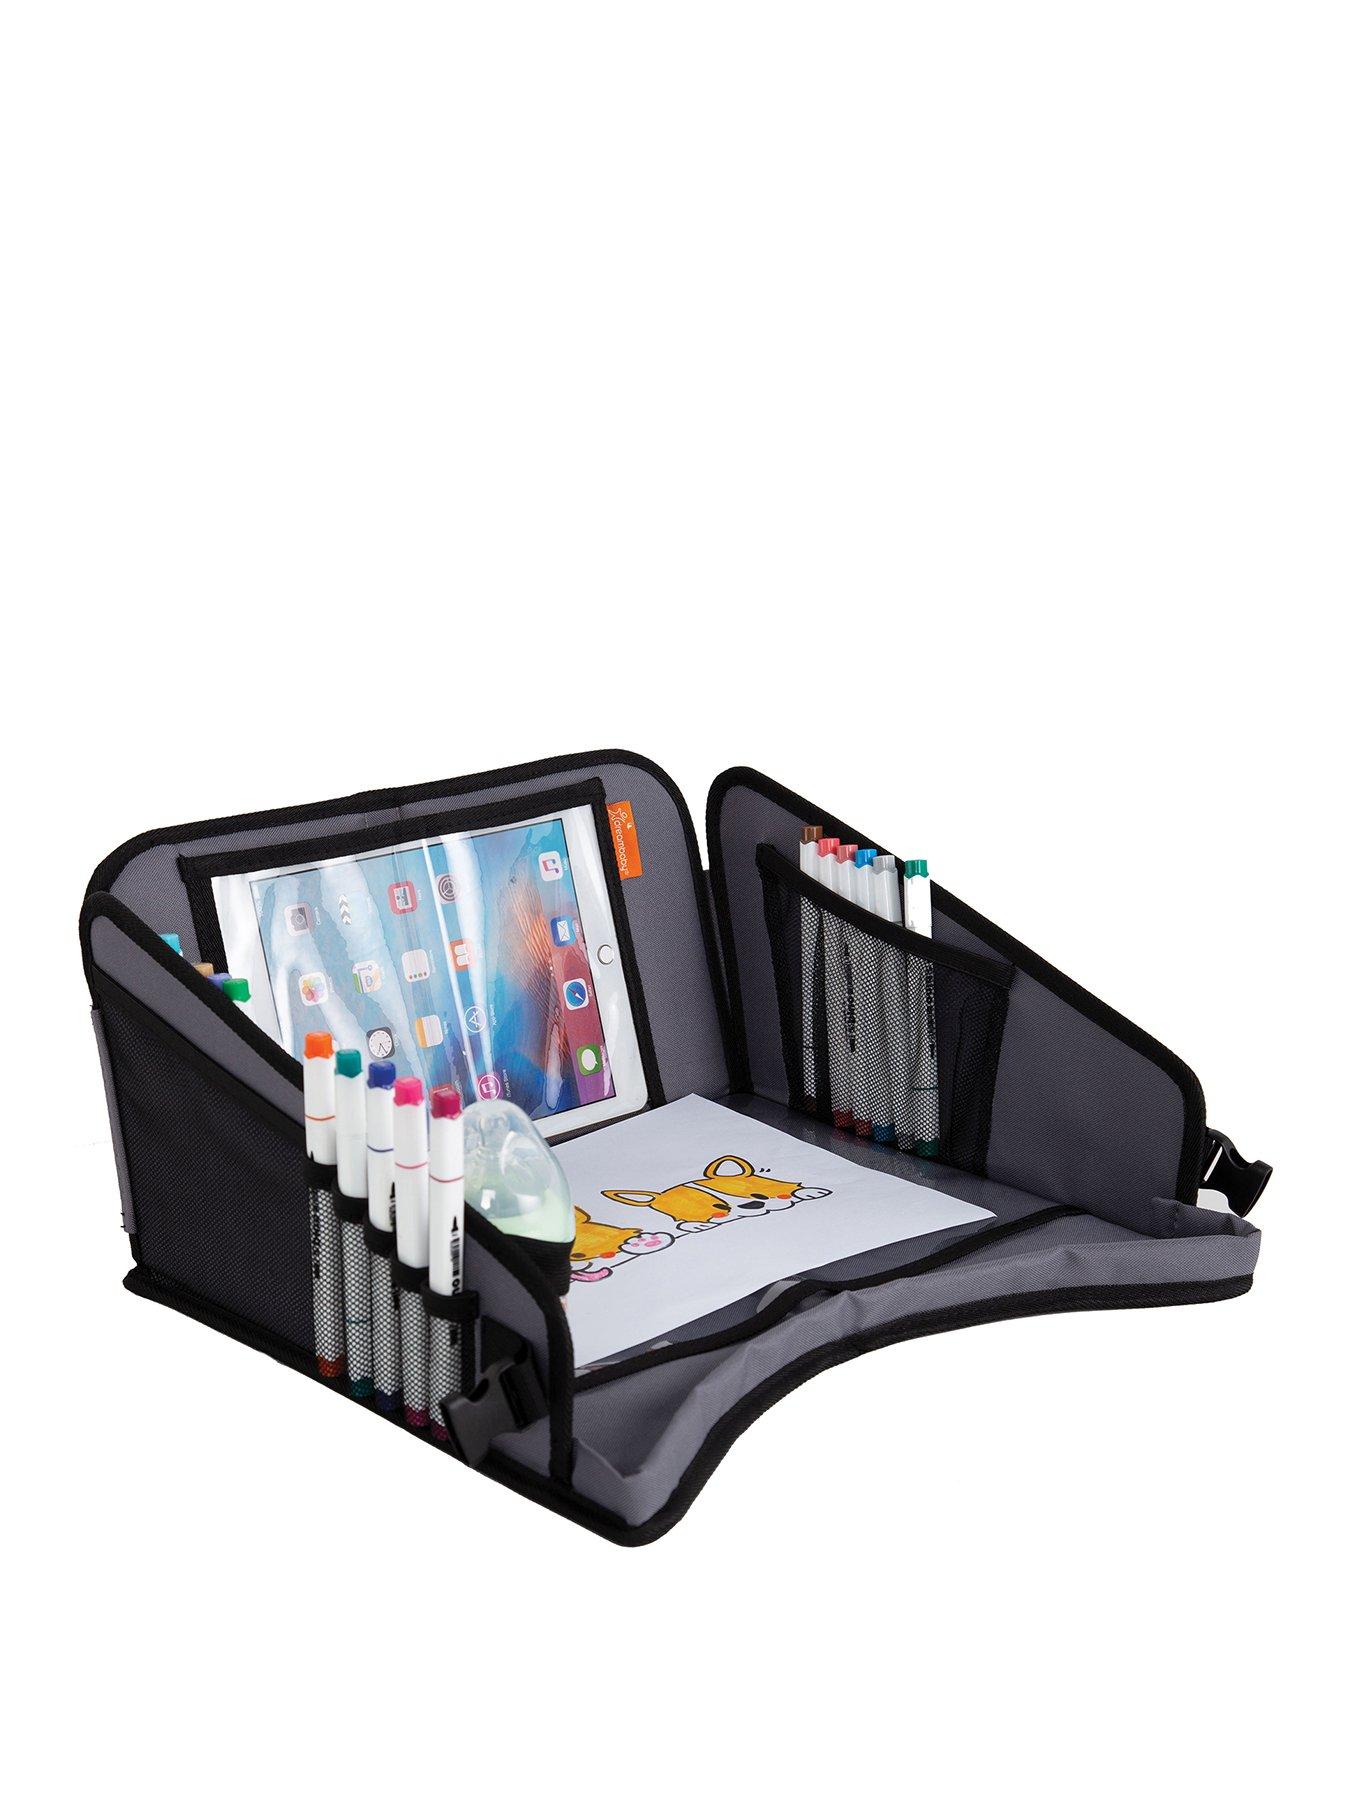 Dreambaby On-the-Go Extra-Large Car Tray Table with Tablet Holder, Storage  Pockets & Carry Strap